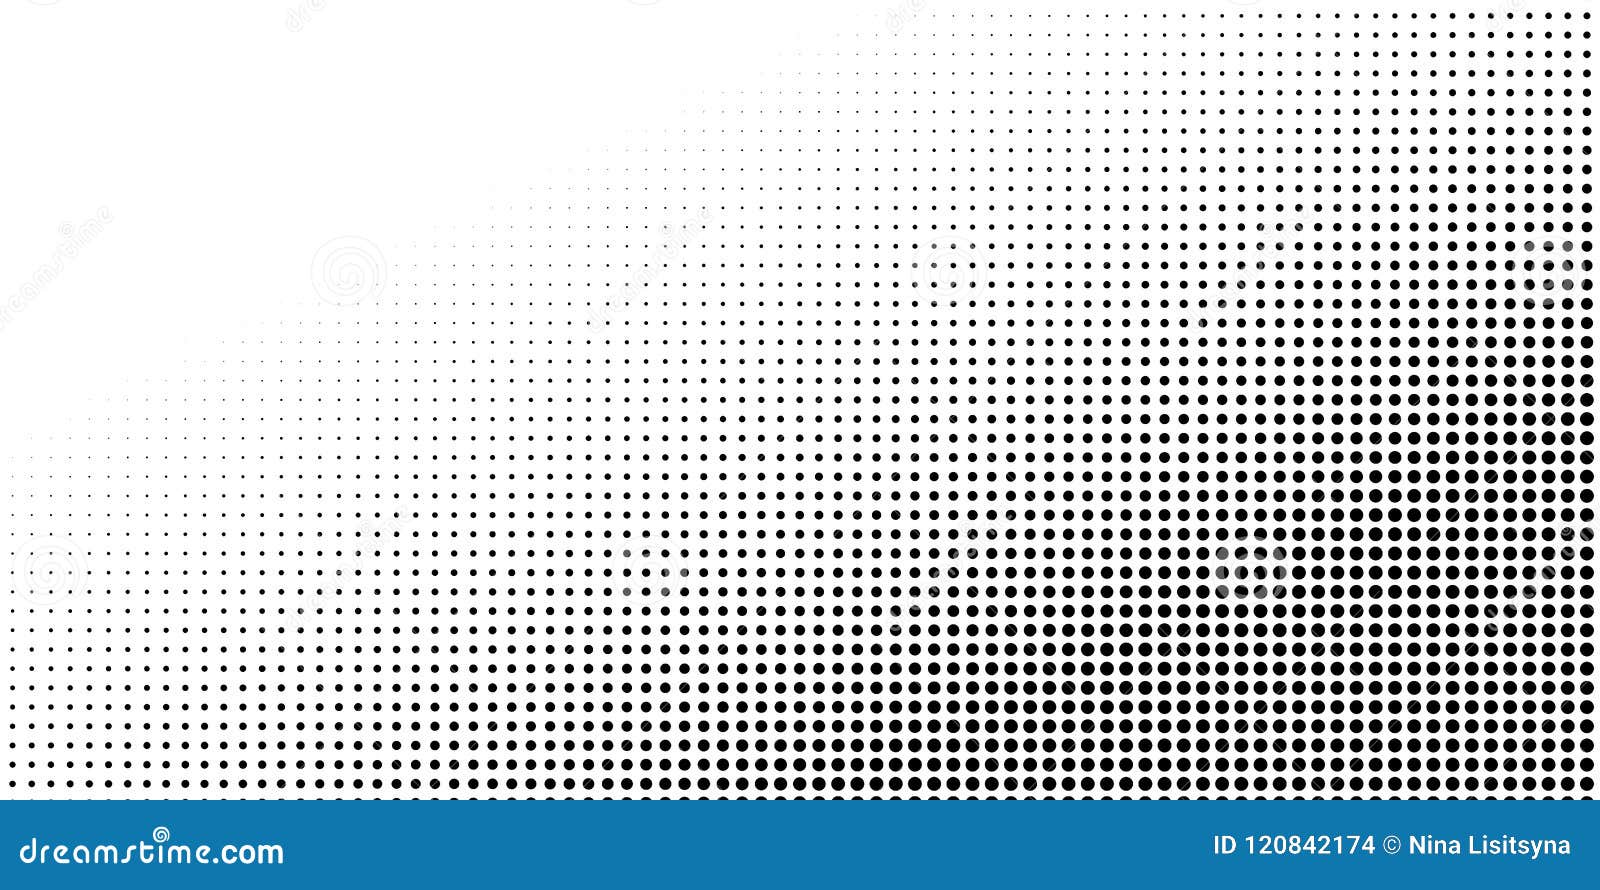 abstract halftone texture with dots.